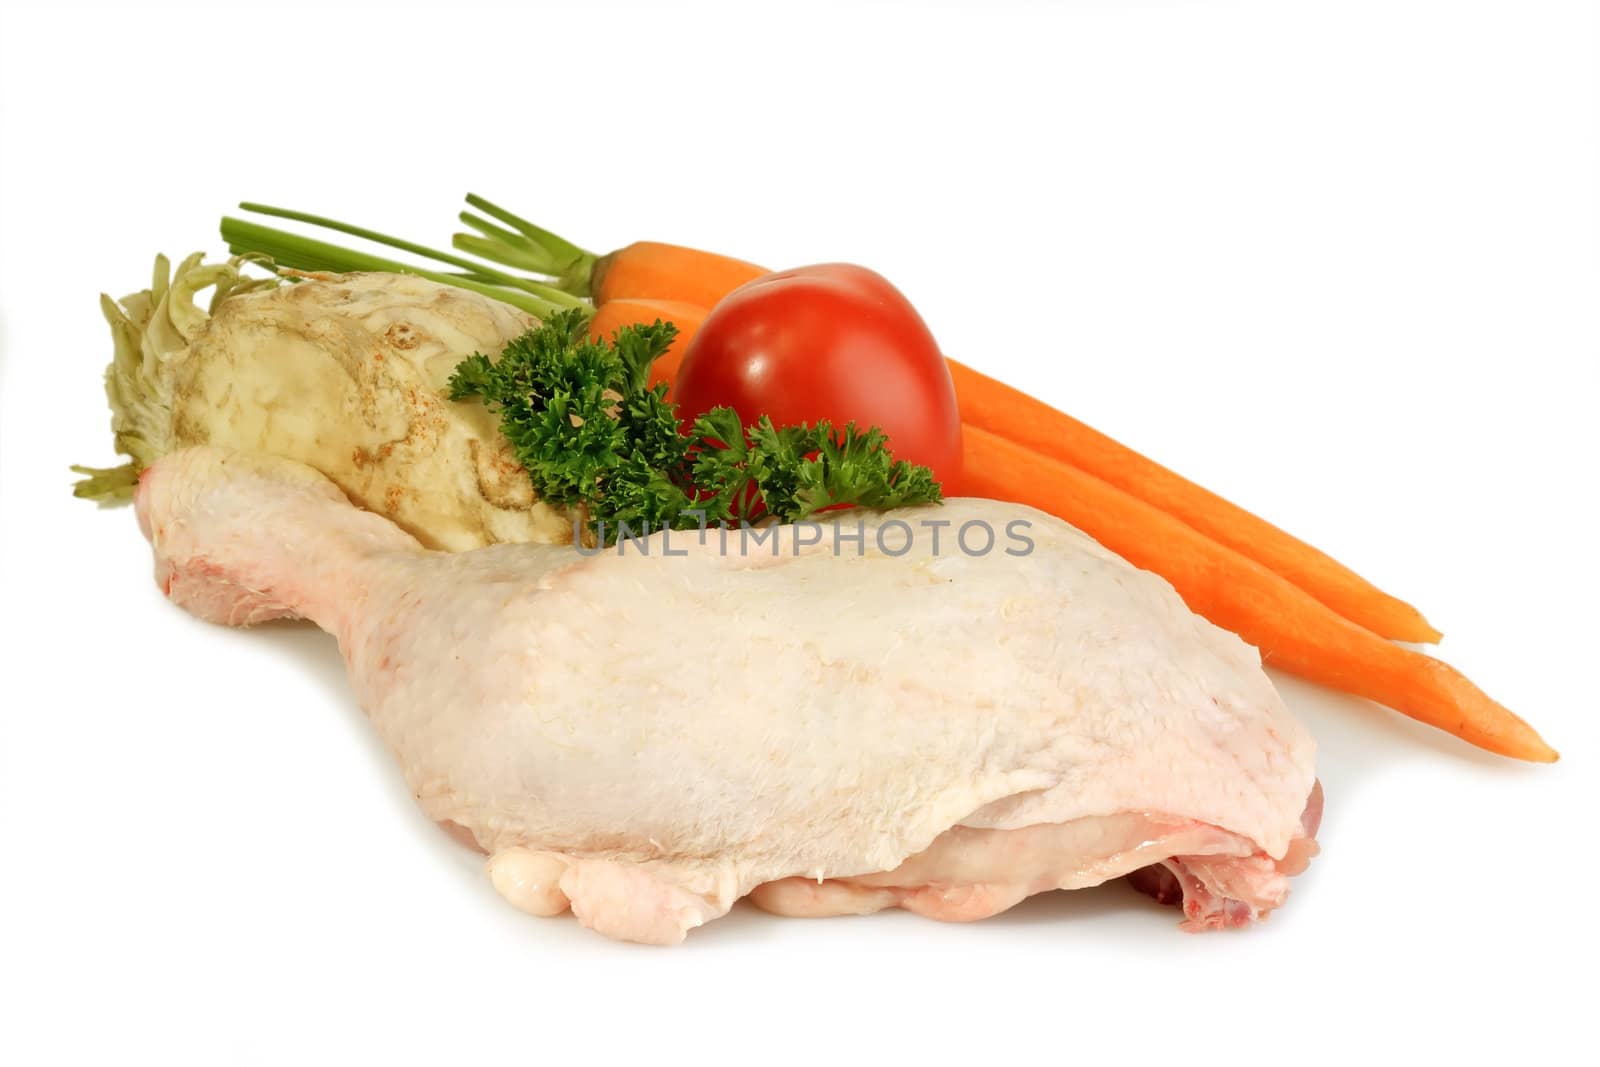 Raw chicken leg with vegetables on bright background